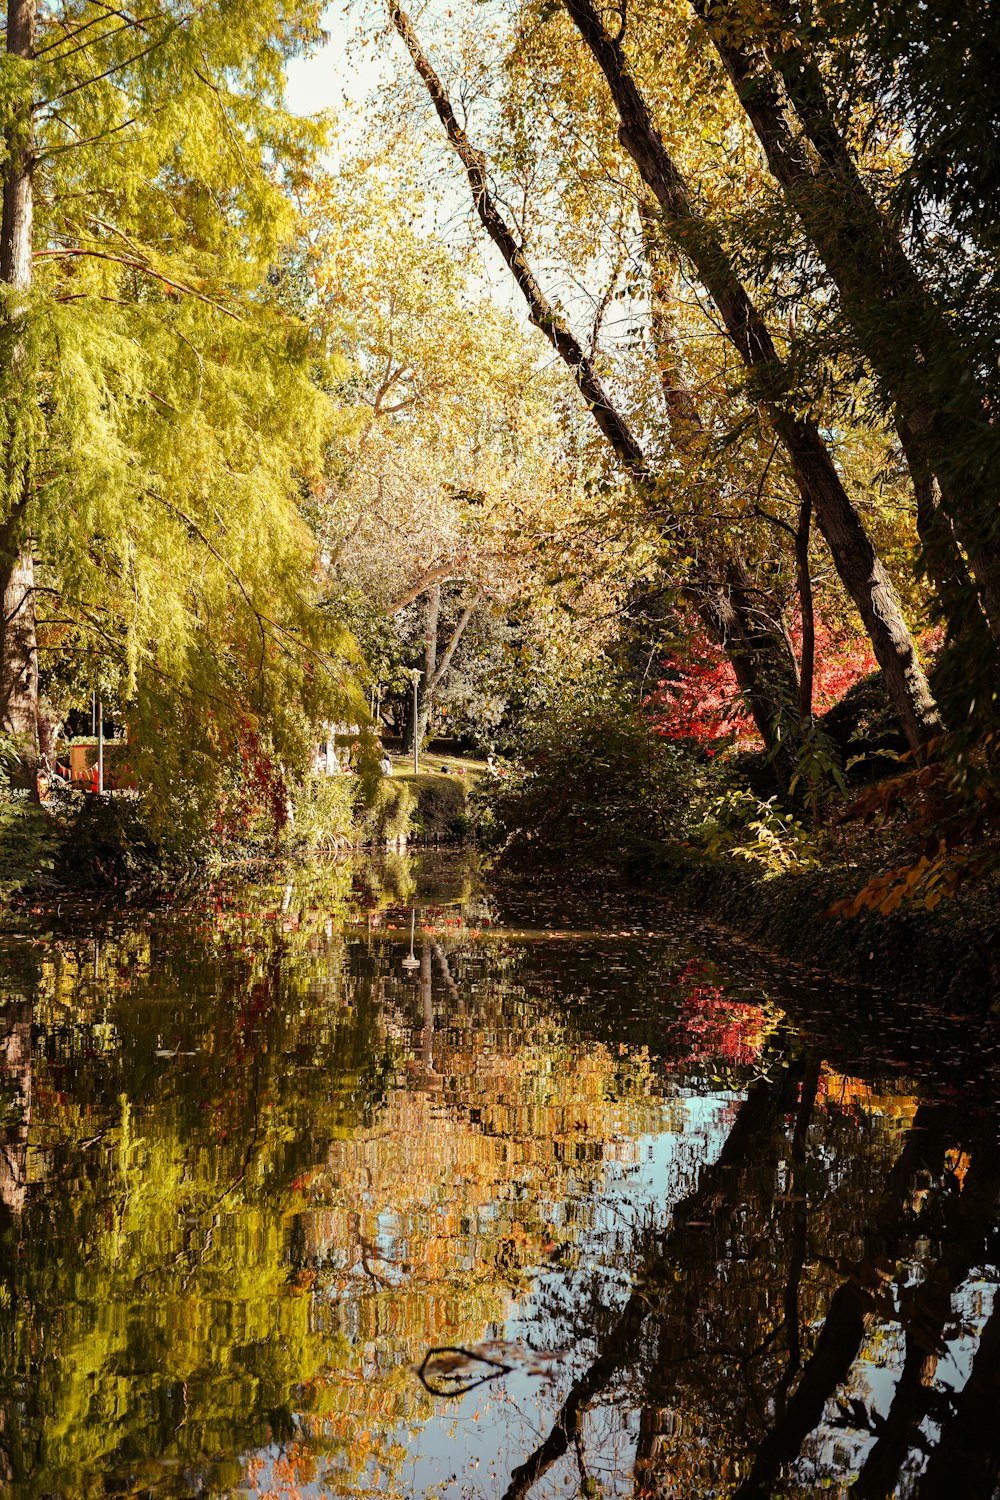 a small pond surrounded by trees in the fall